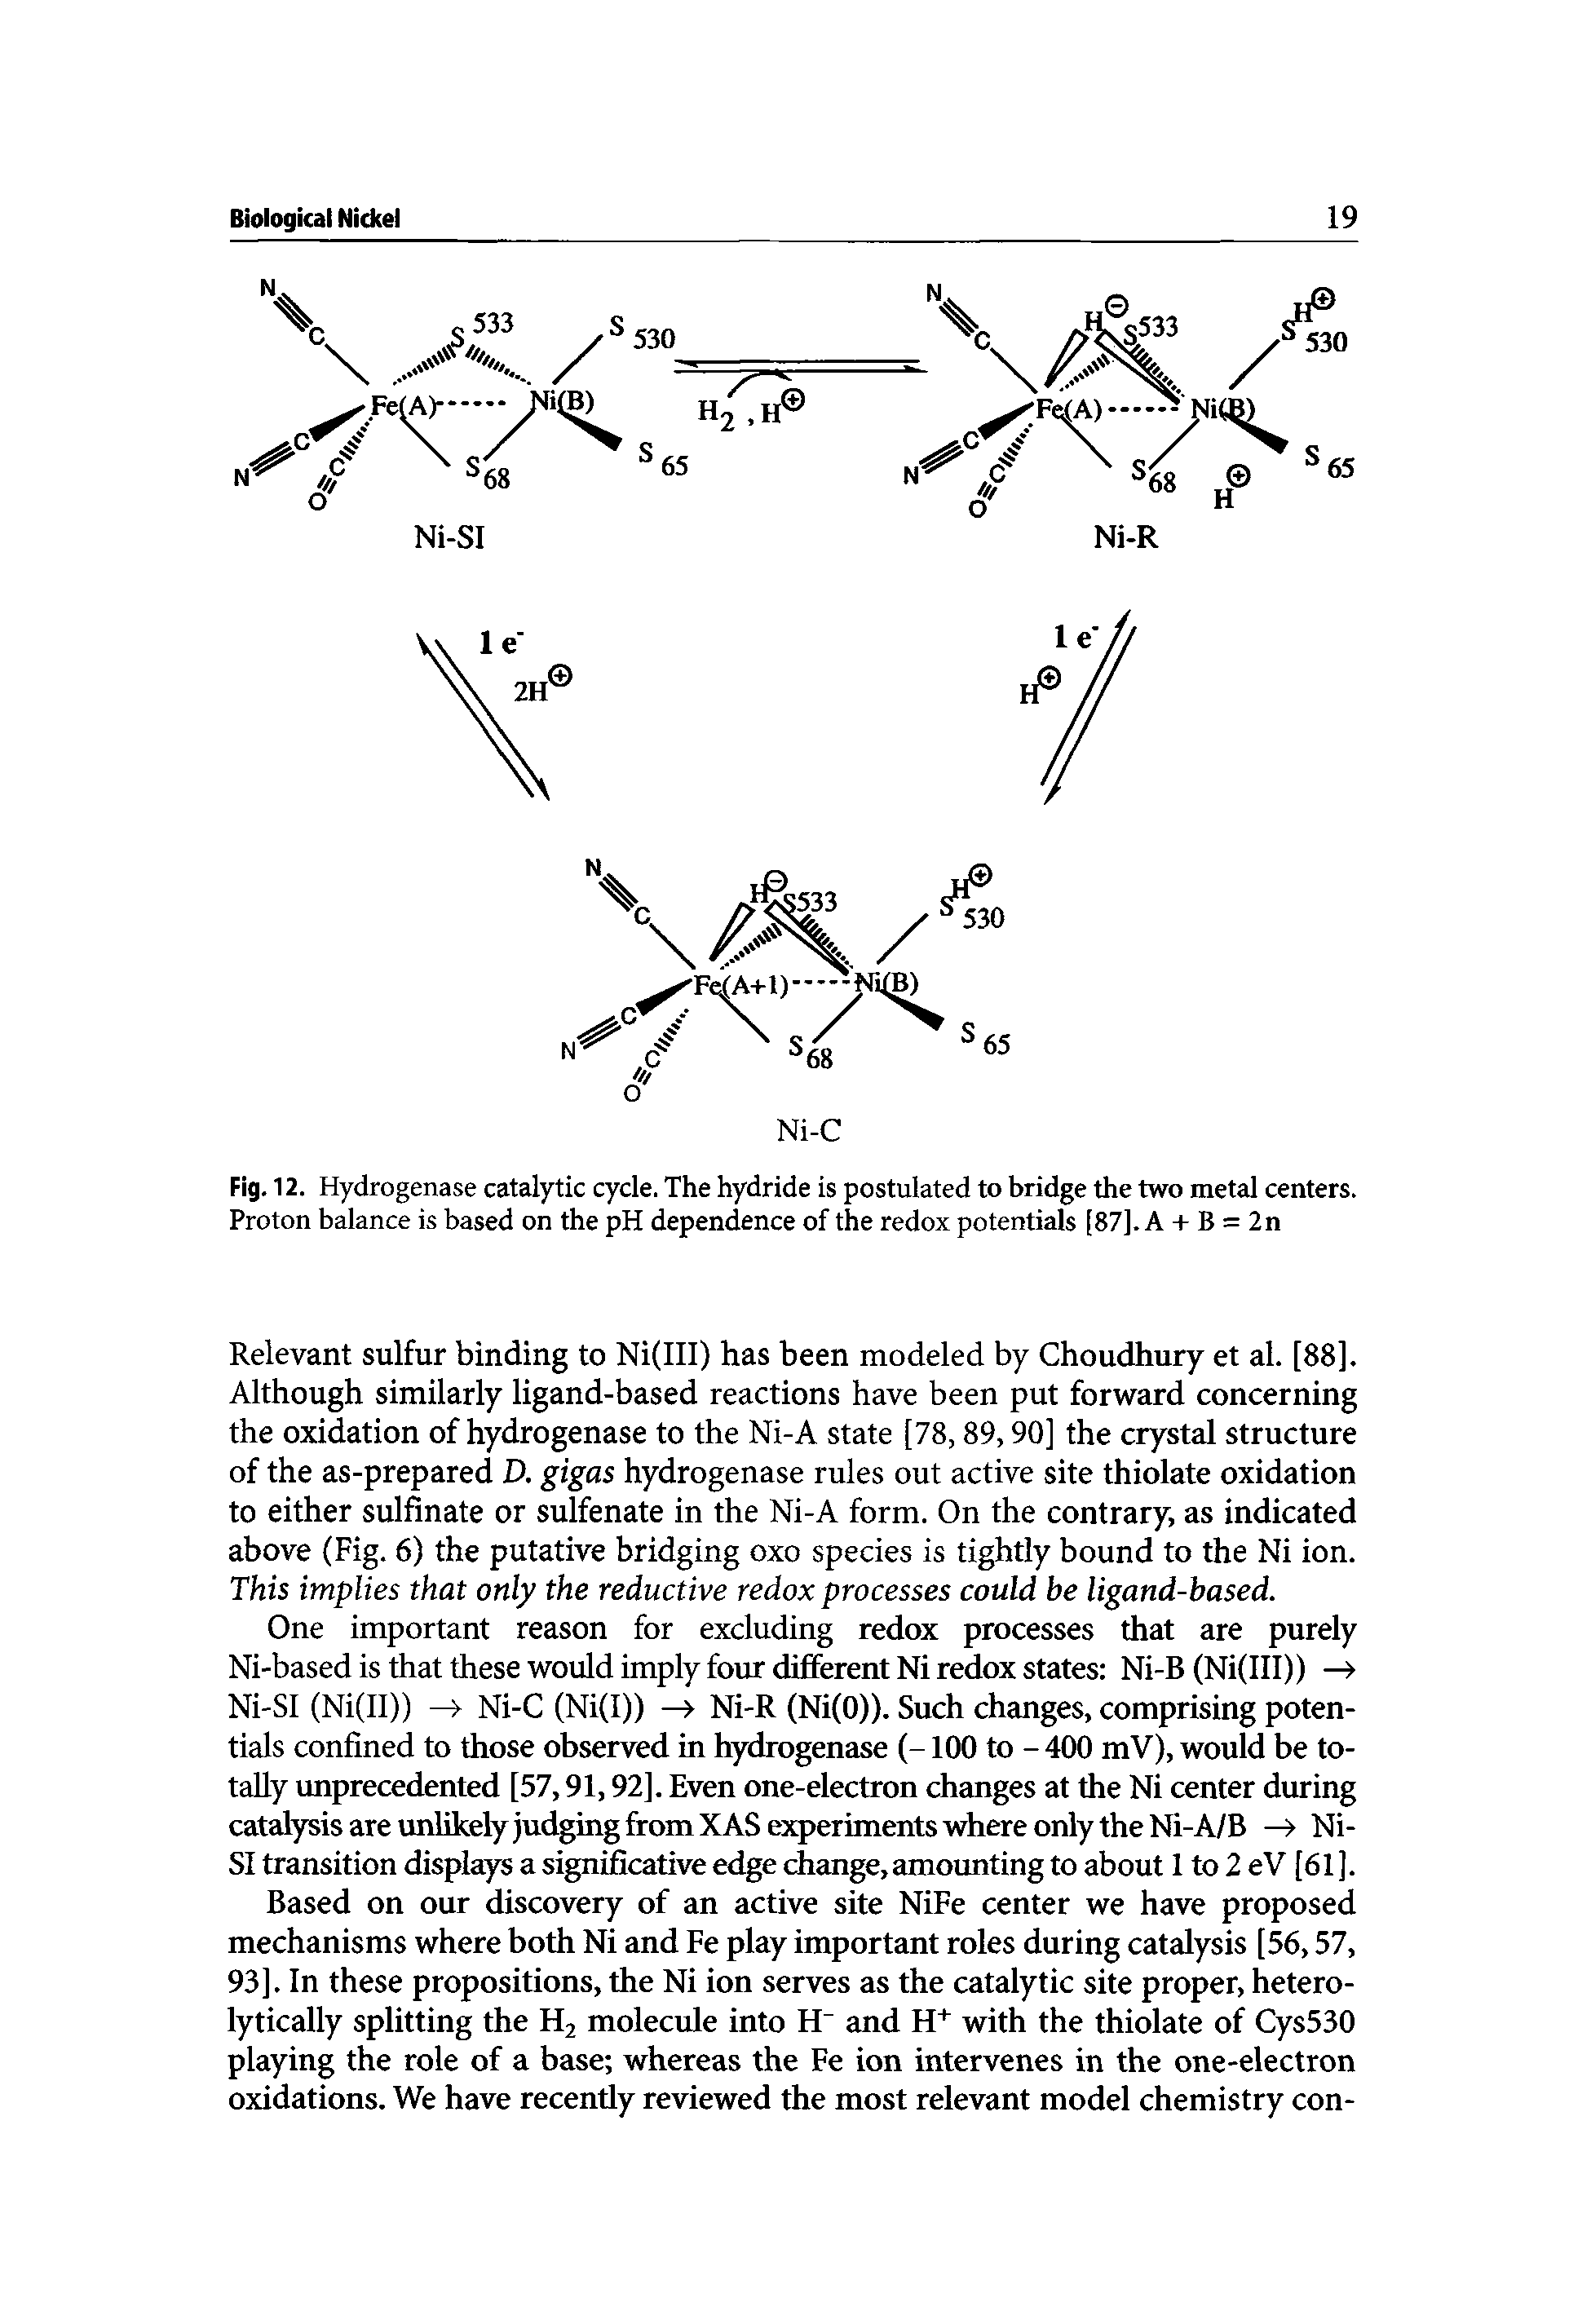 Fig. 12. Hydrogenase catalytic cycle. The hydride is postulated to bridge the two metal centers. Proton balance is based on the pH dependence of the redox potentials [87]. A + B = 2n...